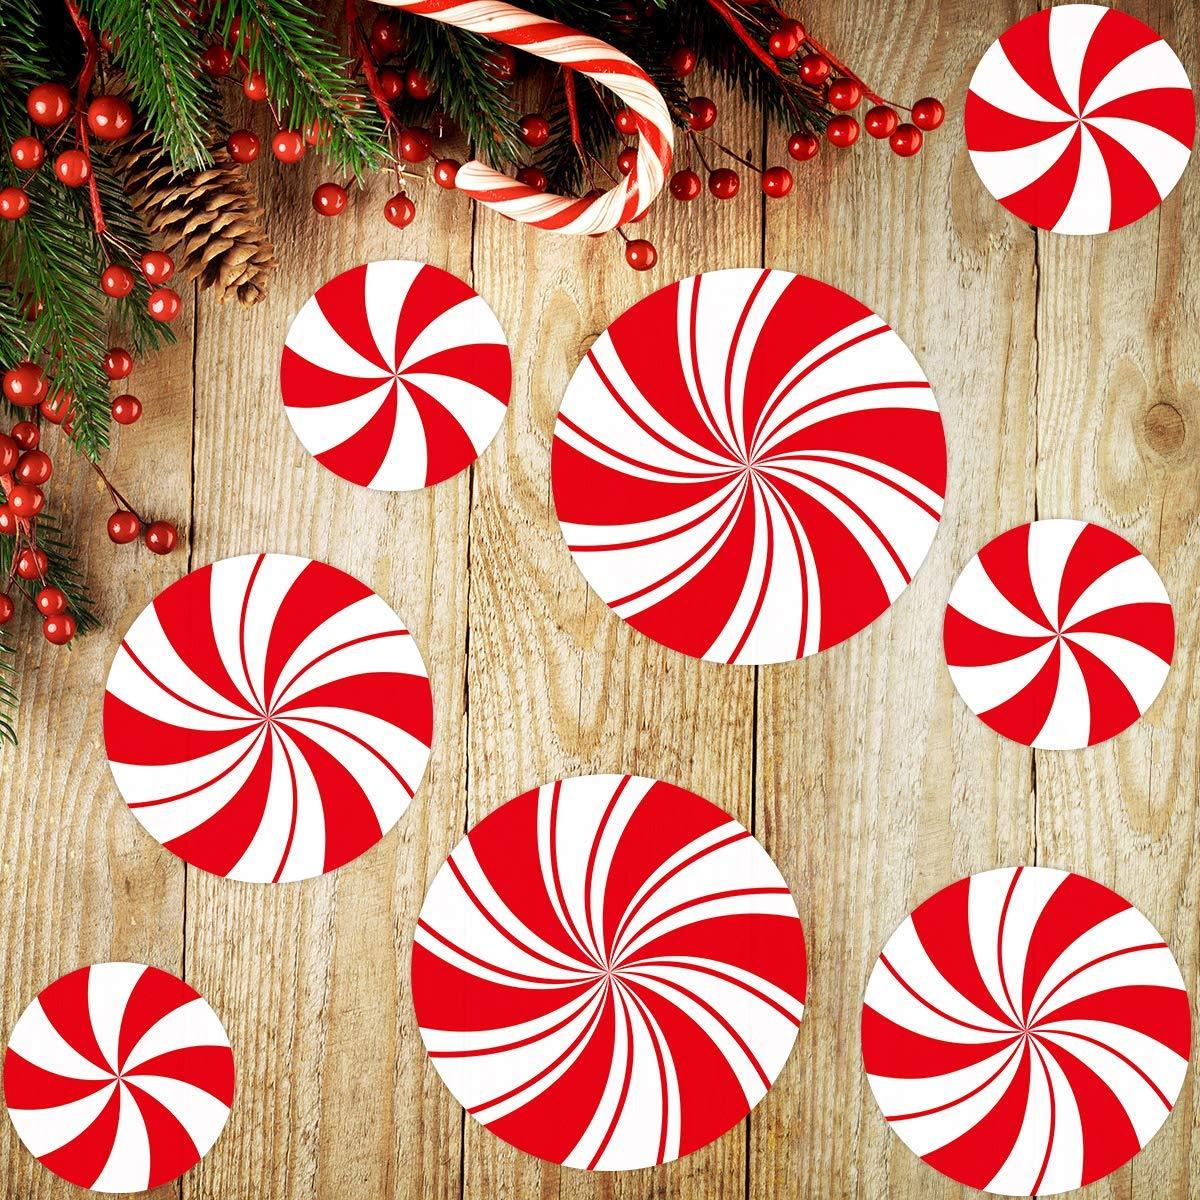 New Beautiful Peppermint Floor Decals Stickers for Christmas